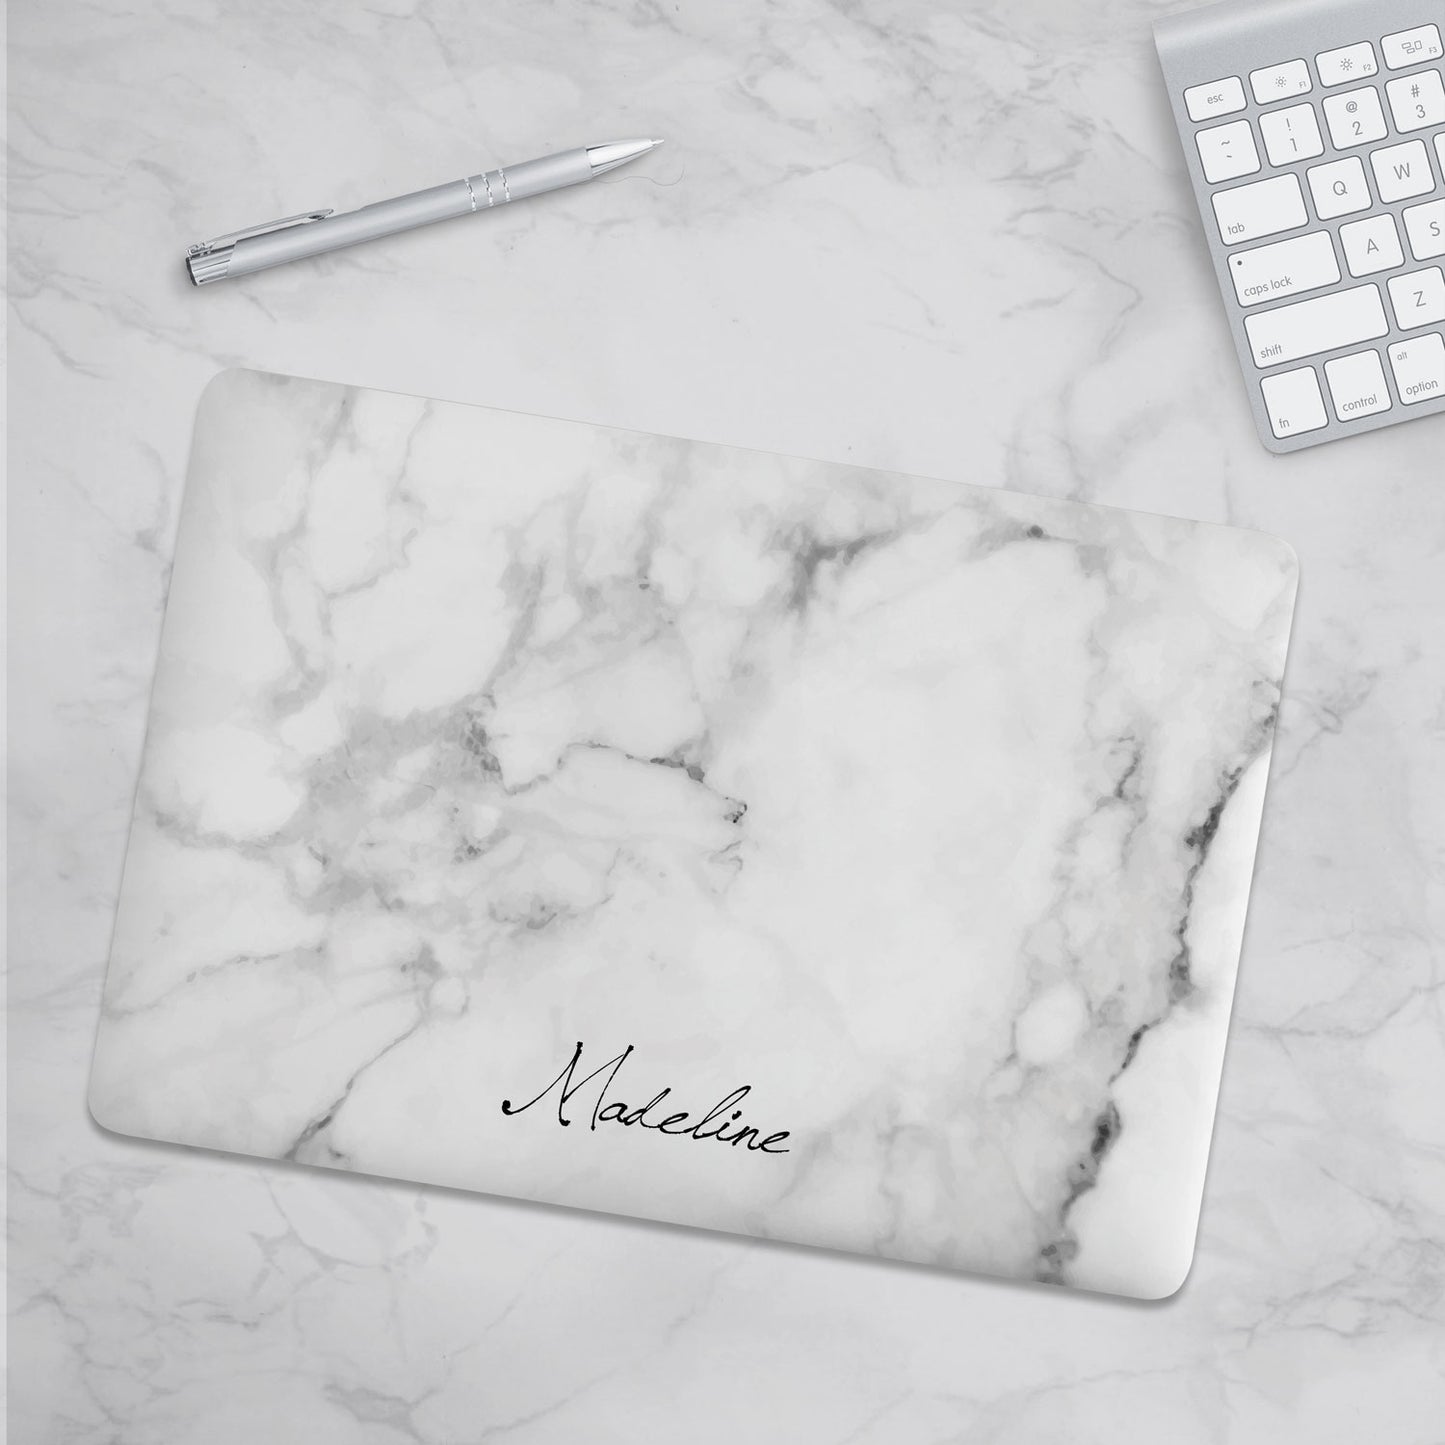 Personalized Macbook Hard Shell Case - White Marble